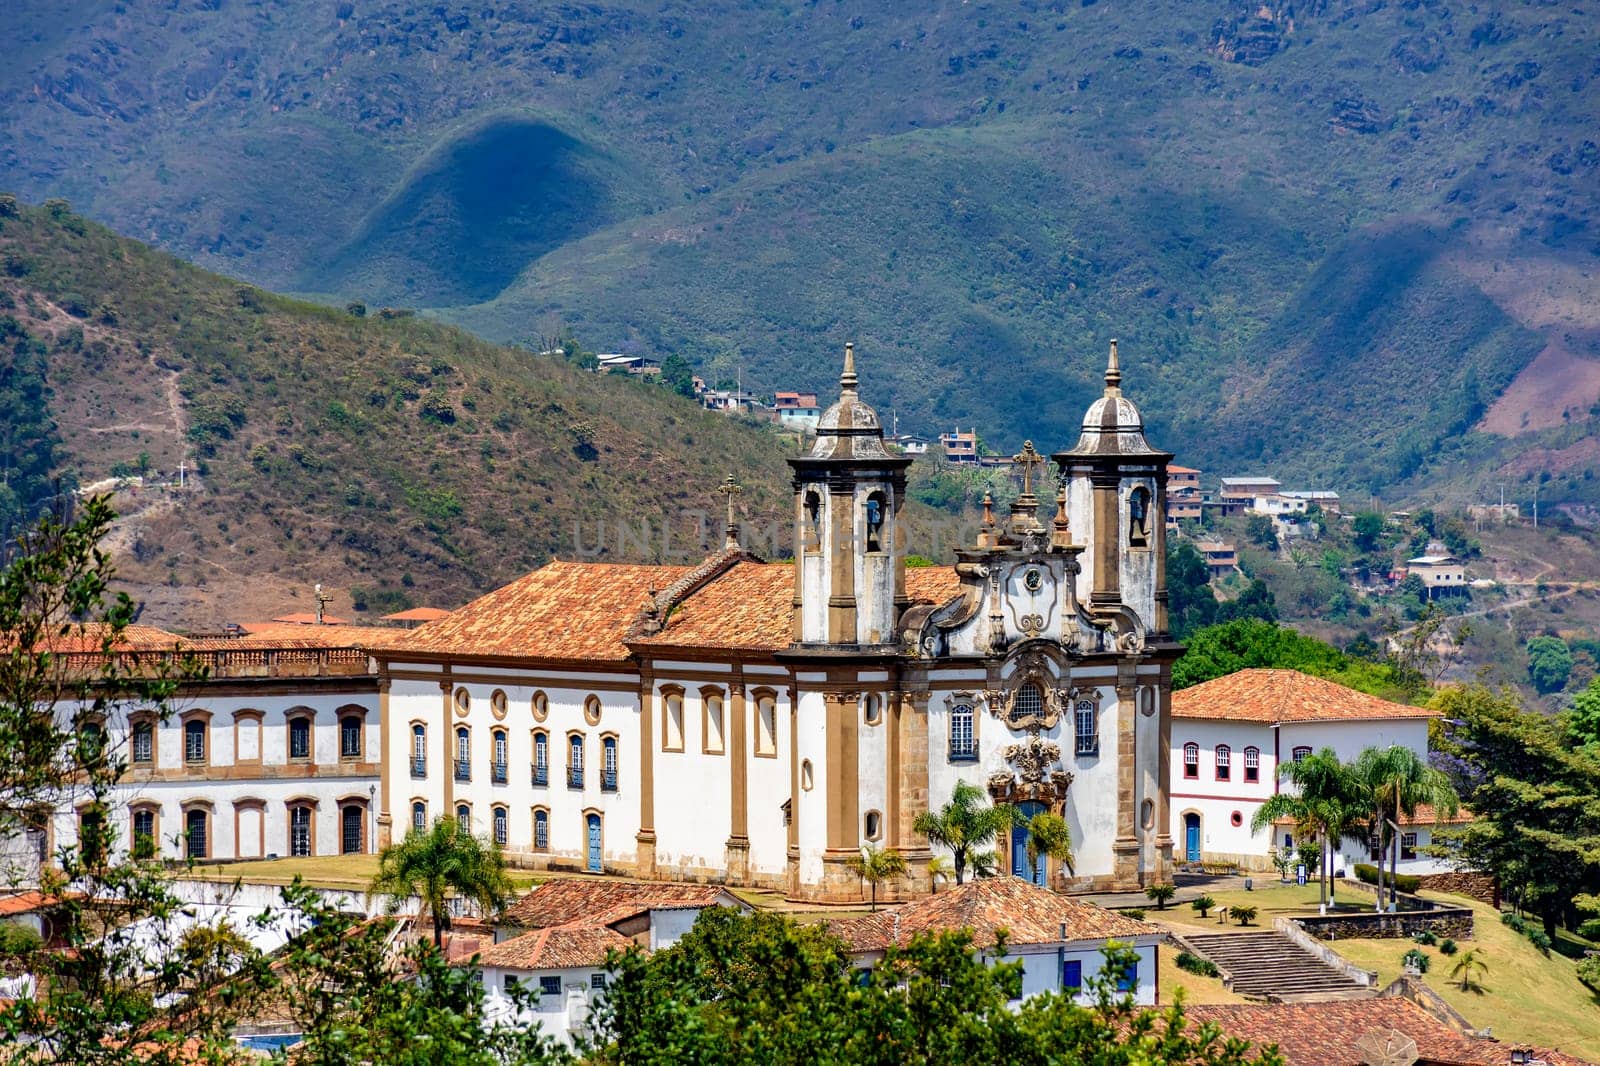 View of historic 18th century church in colonial architecture in the city of Ouro Preto in Minas Gerais, Brazil with hills in background